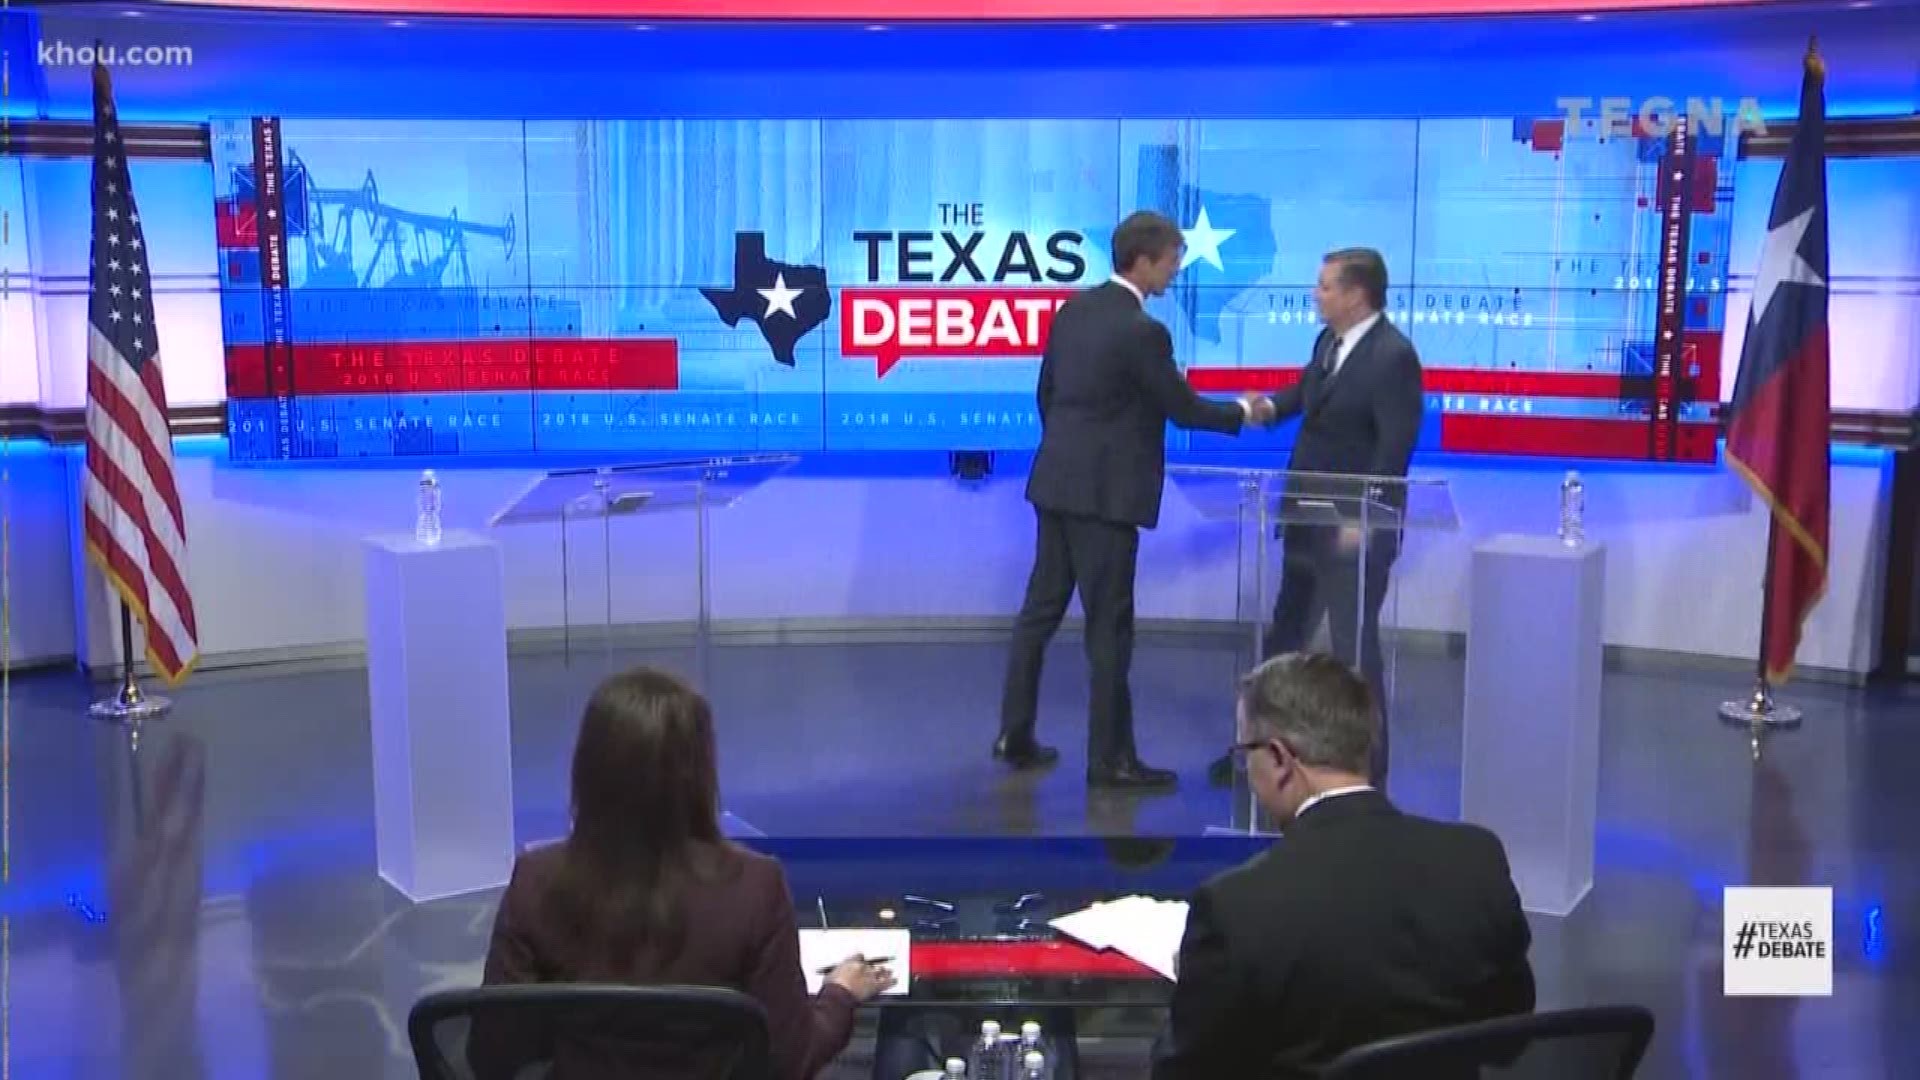 Sen. Ted Cruz and Congressman Beto O'Rourke tackled several issues during their debate Tuesday night.